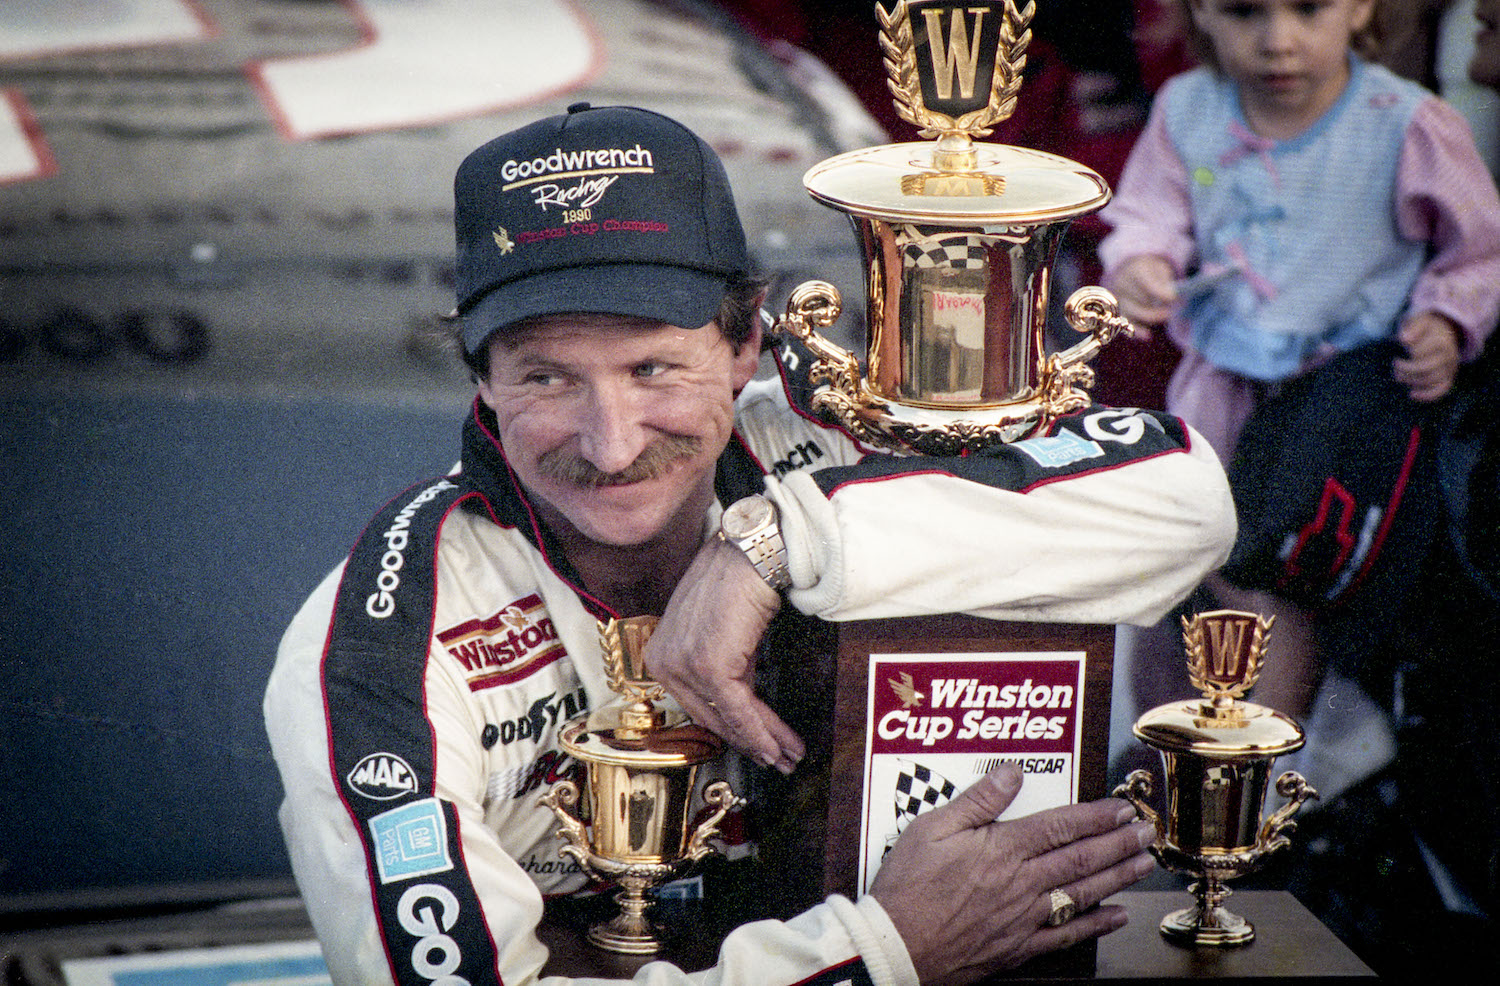 Dale Earnhardt Sr. hugs the Winston Cup trophy after clinching the 1990s championship.